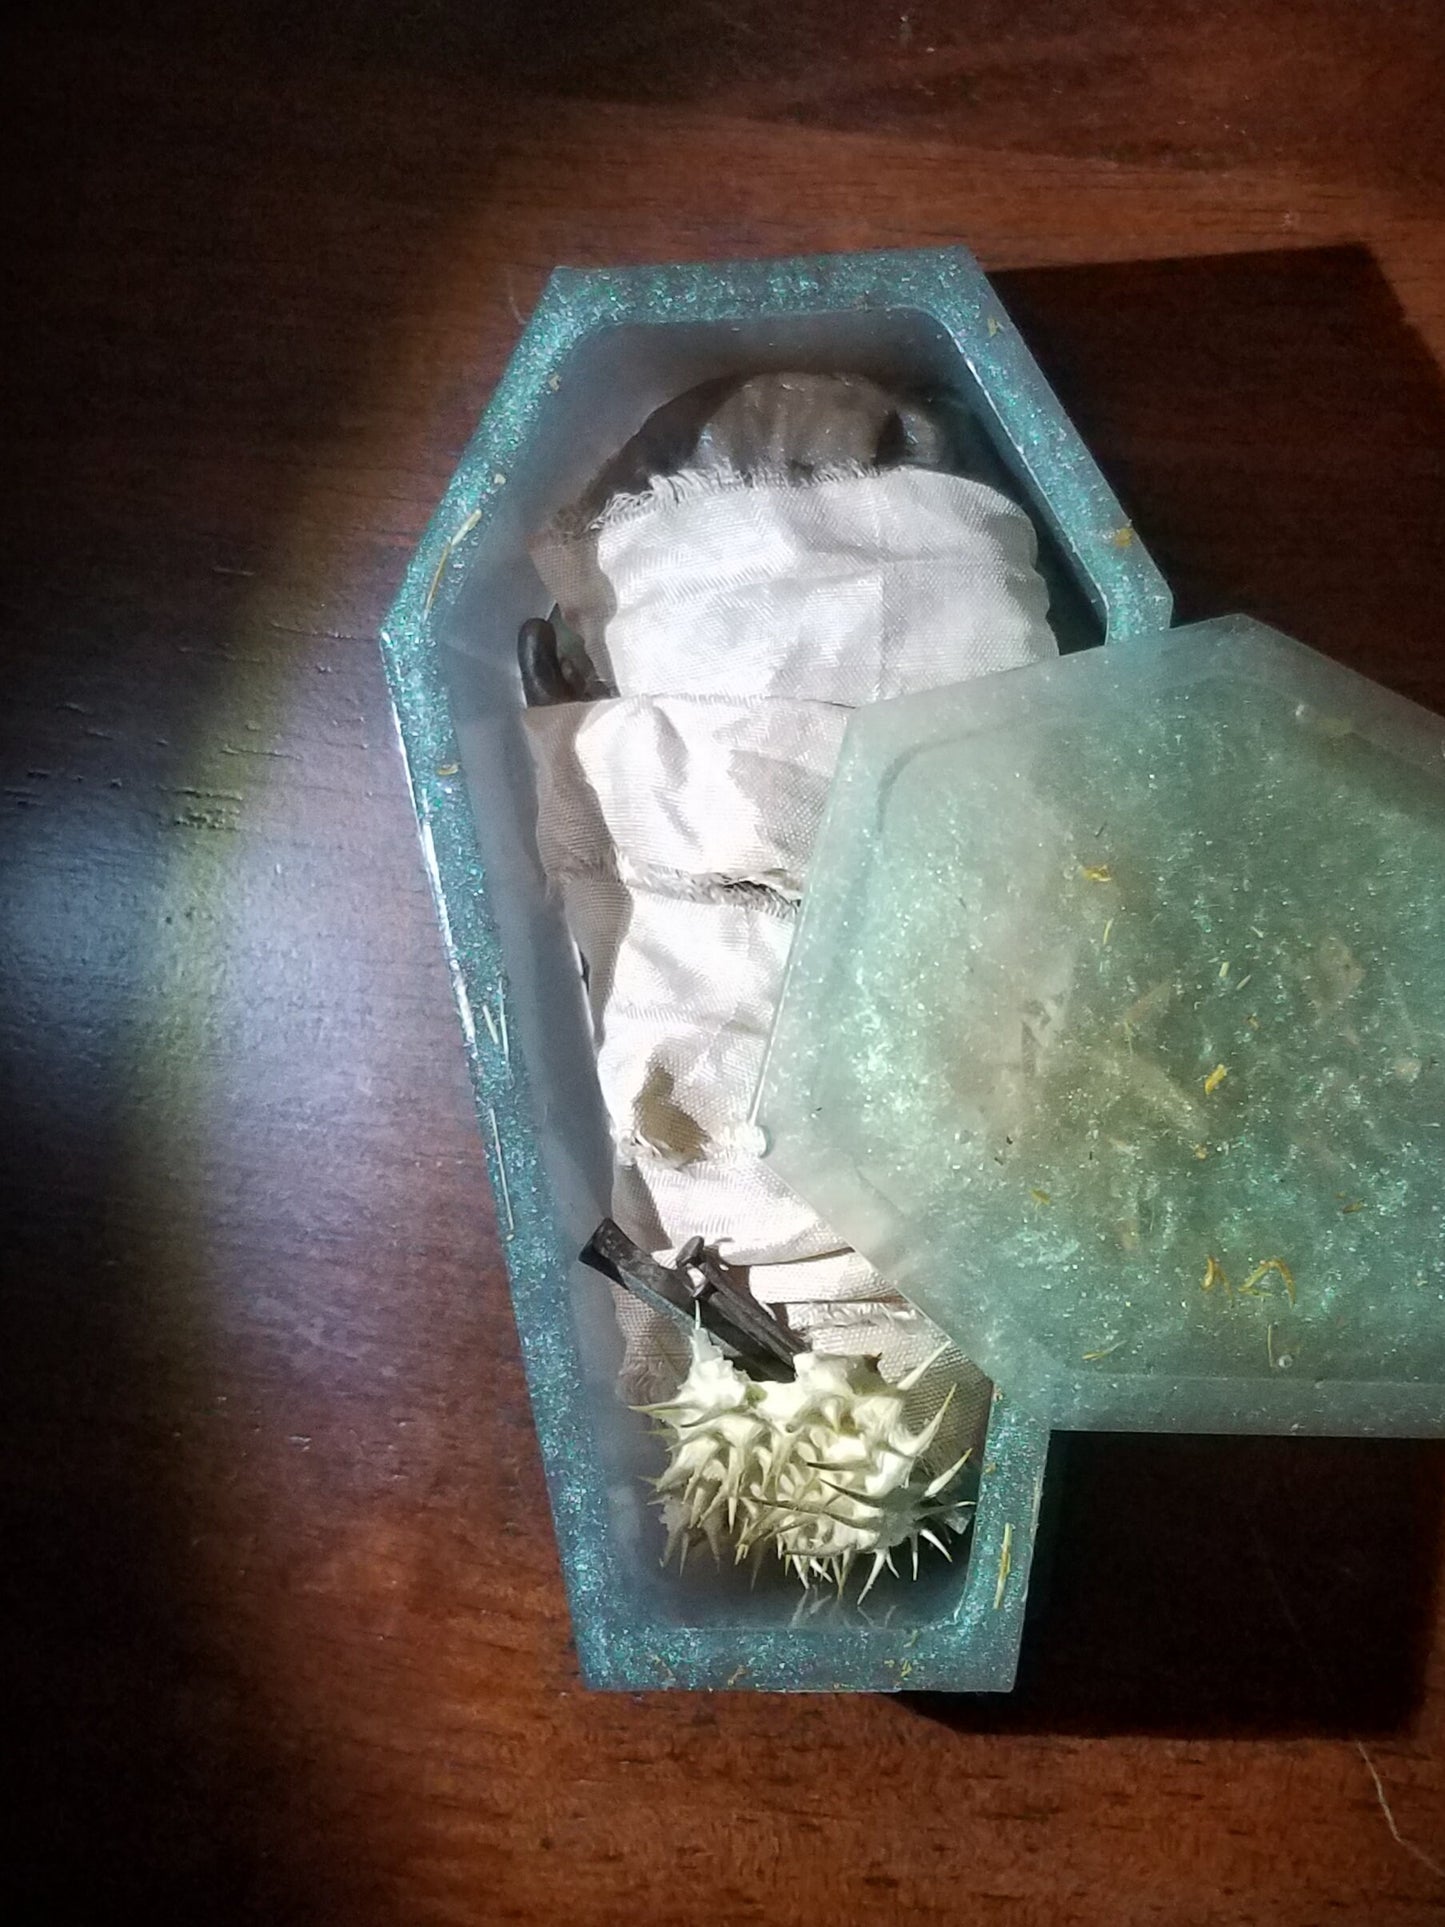 Beeswax Poppet, Coffin Spell Box, Black Magic, Voodoo Doll, Magical Mystical